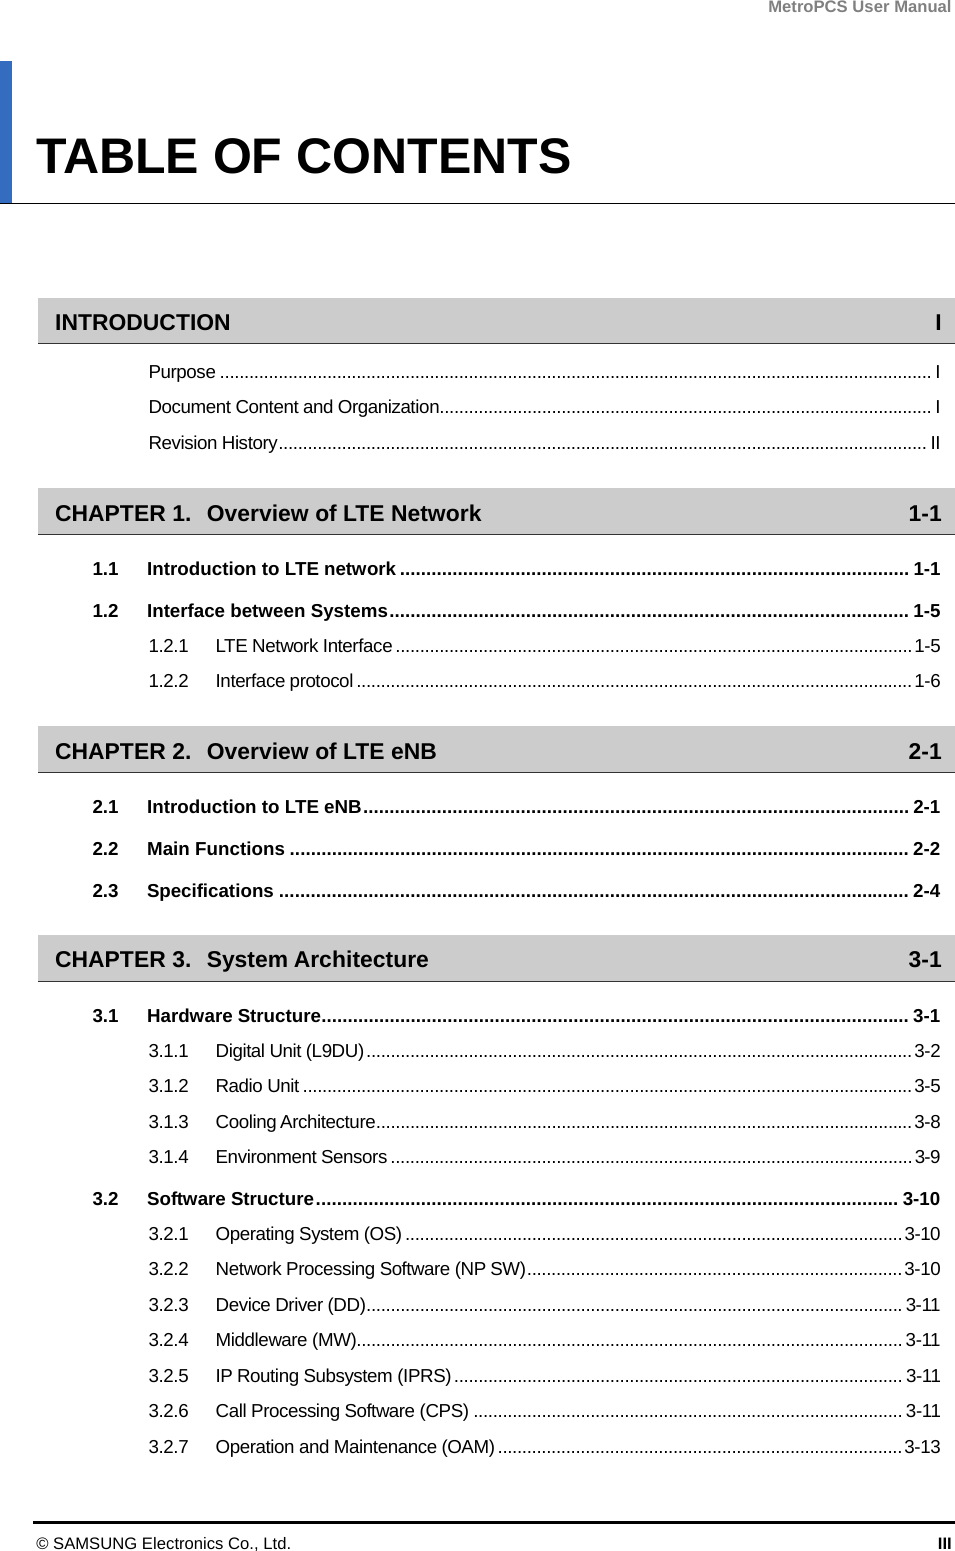 MetroPCS User Manual © SAMSUNG Electronics Co., Ltd.  III TABLE OF CONTENTS   INTRODUCTION I Purpose .................................................................................................................................................. I Document Content and Organization..................................................................................................... I Revision History..................................................................................................................................... II CHAPTER 1. Overview of LTE Network  1-1 1.1 Introduction to LTE network ................................................................................................. 1-1 1.2 Interface between Systems................................................................................................... 1-5 1.2.1 LTE Network Interface ..........................................................................................................1-5 1.2.2 Interface protocol ..................................................................................................................1-6 CHAPTER 2. Overview of LTE eNB  2-1 2.1 Introduction to LTE eNB........................................................................................................ 2-1 2.2 Main Functions ...................................................................................................................... 2-2 2.3 Specifications ........................................................................................................................ 2-4 CHAPTER 3. System Architecture  3-1 3.1 Hardware Structure................................................................................................................ 3-1 3.1.1 Digital Unit (L9DU)................................................................................................................3-2 3.1.2 Radio Unit .............................................................................................................................3-5 3.1.3 Cooling Architecture..............................................................................................................3-8 3.1.4 Environment Sensors ...........................................................................................................3-9 3.2 Software Structure............................................................................................................... 3-10 3.2.1 Operating System (OS) ......................................................................................................3-10 3.2.2 Network Processing Software (NP SW).............................................................................3-10 3.2.3 Device Driver (DD)..............................................................................................................3-11 3.2.4 Middleware (MW)................................................................................................................ 3-11 3.2.5 IP Routing Subsystem (IPRS)............................................................................................ 3-11 3.2.6 Call Processing Software (CPS) ........................................................................................ 3-11 3.2.7 Operation and Maintenance (OAM) ...................................................................................3-13 